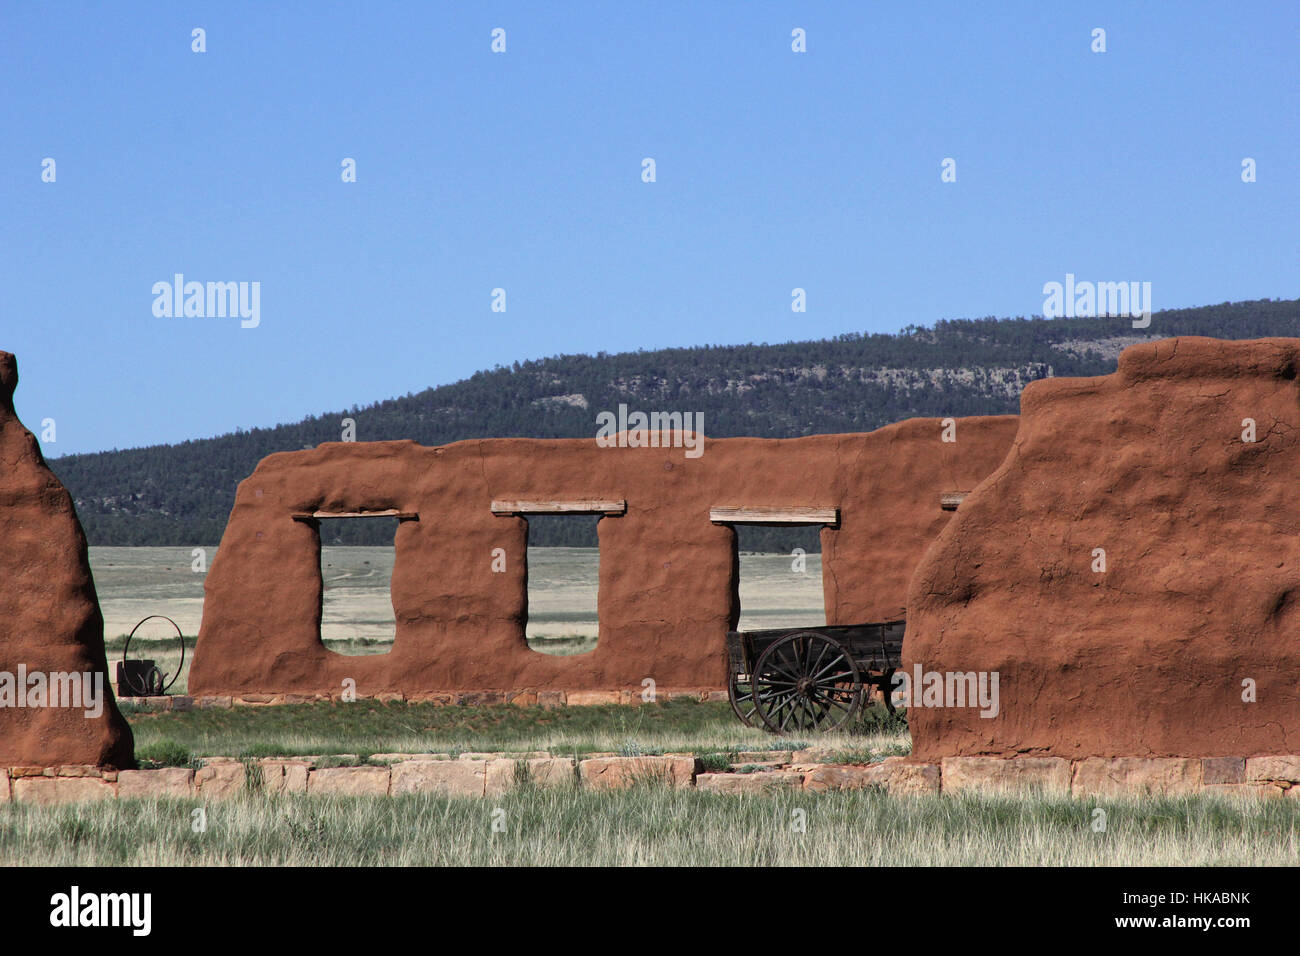 Wagon stands near the remains of the adobe walls of the third Fort Union on the Santa Fe Trail in New Mexico. Stock Photo